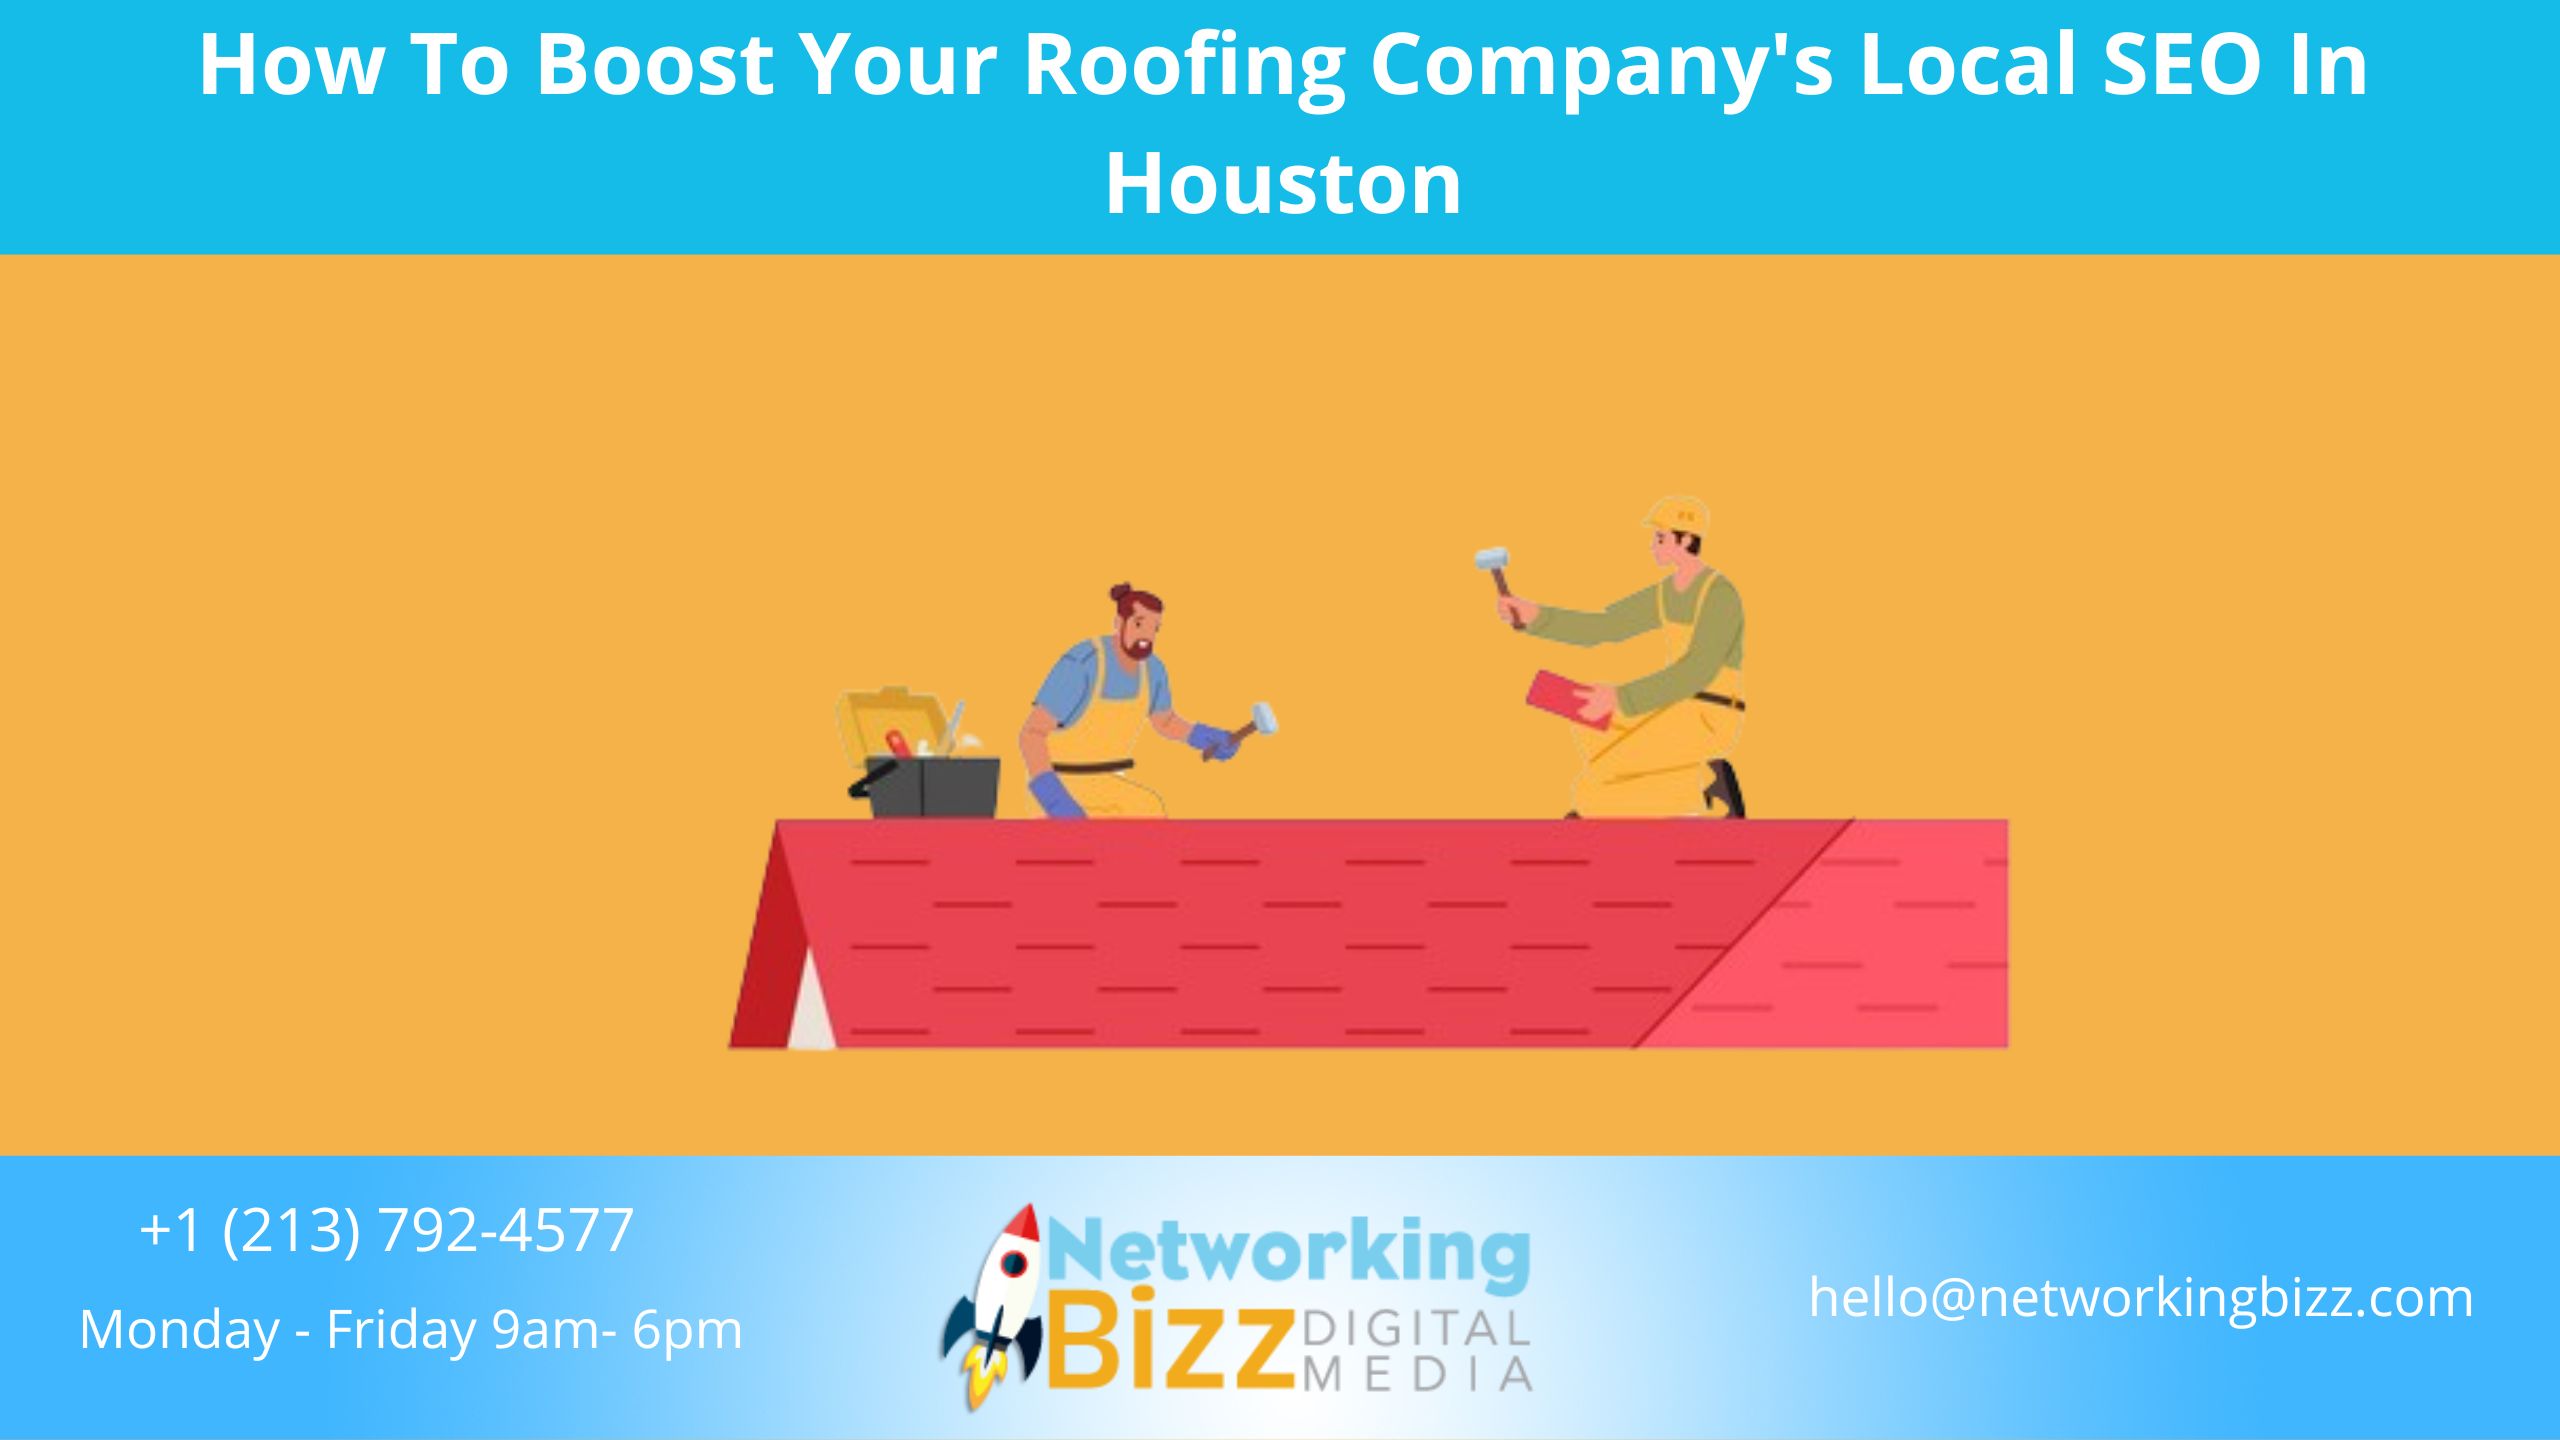 How To Boost Your Roofing Company’s Local SEO In Houston